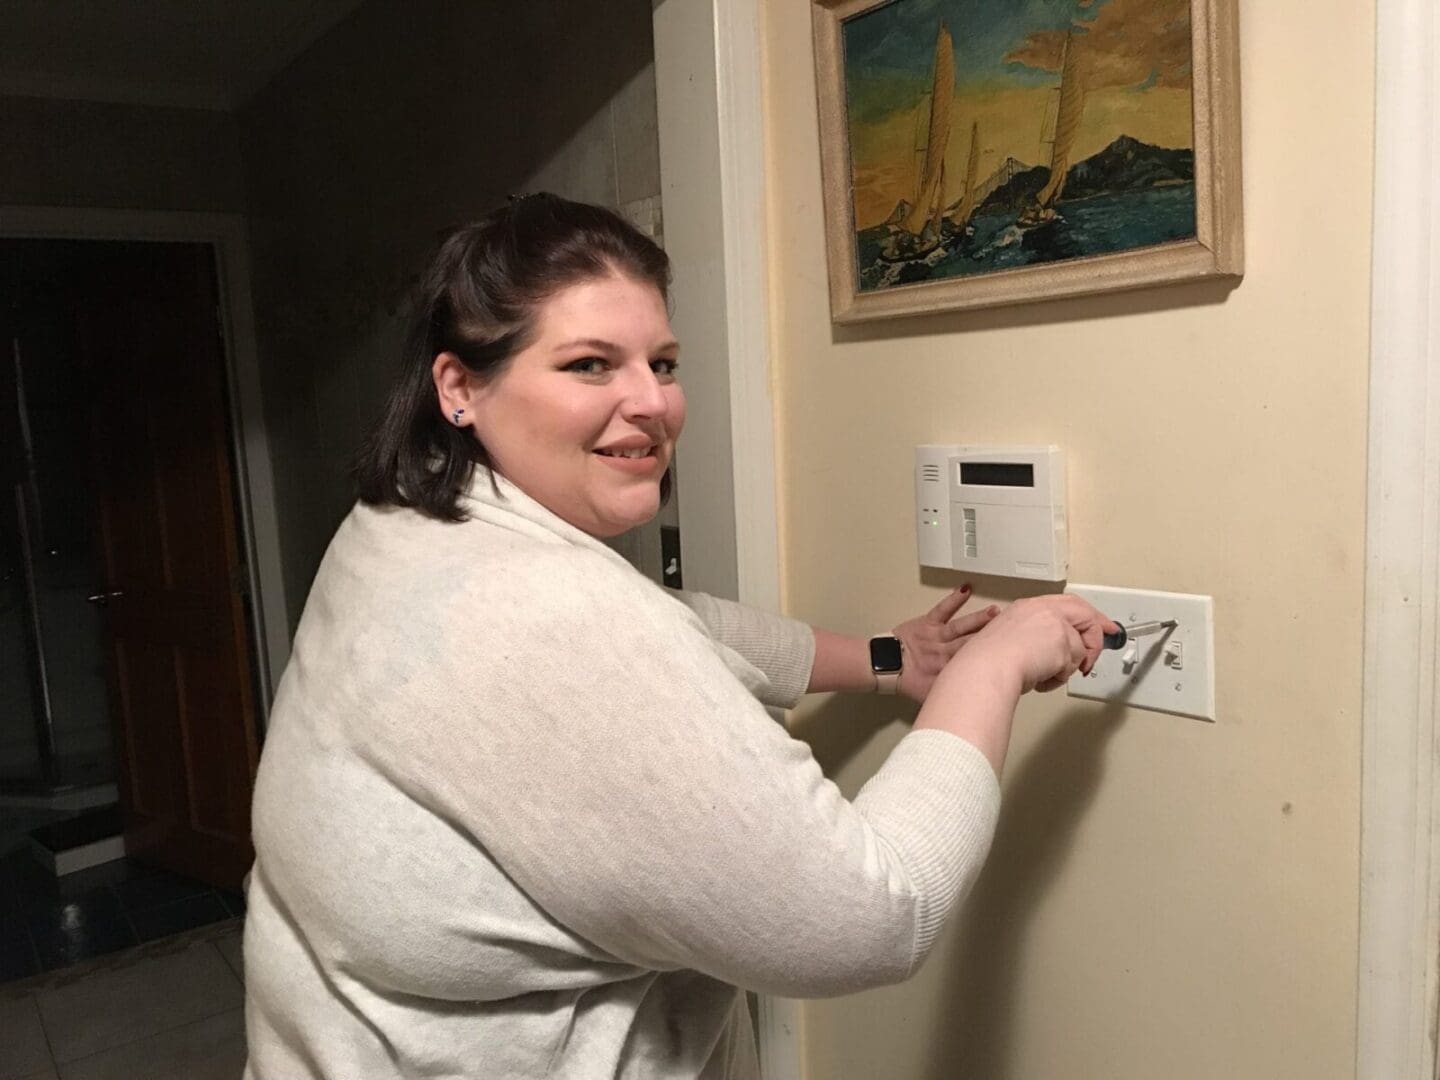 A person looking at the camera while holding a screwdriver and repairing a wall socket